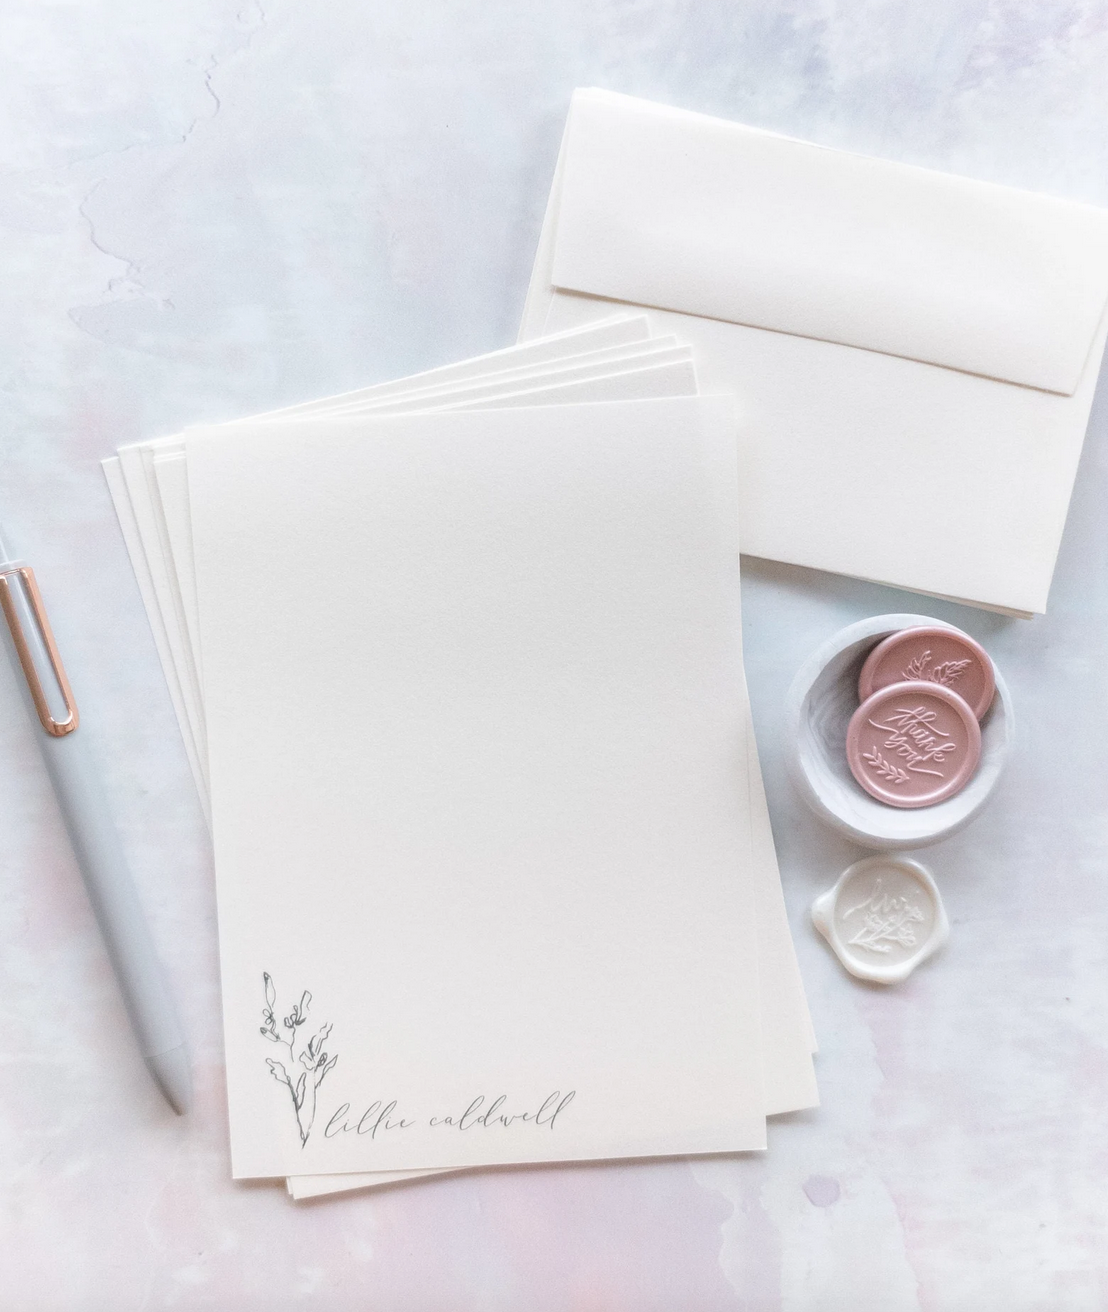 Cream colored stationary with white pen and pink and white wax buttons